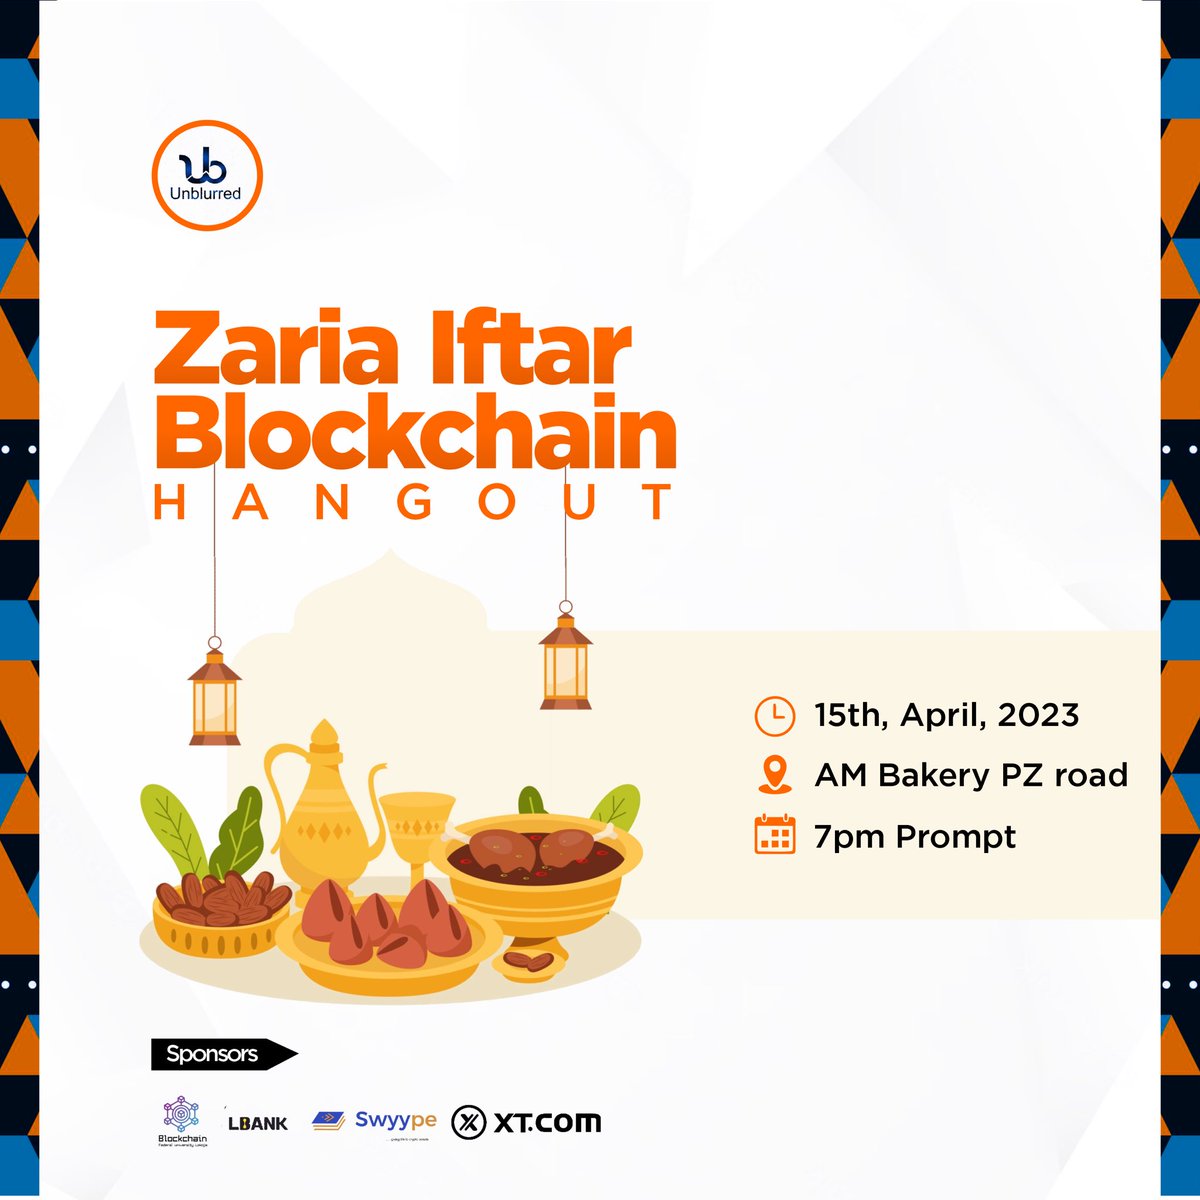 Excited to announce that we are partnering with Blockchain Unblurred  for the upcoming Zaria Iftar Blockchain Hangout on April 15, 2022 at 7:00 PM! 🚀🚀🚀🚀

#UnblurredHangout #ZariaIftarBlockchainHangout #Networking #BlockchainEvents #Blockchainful